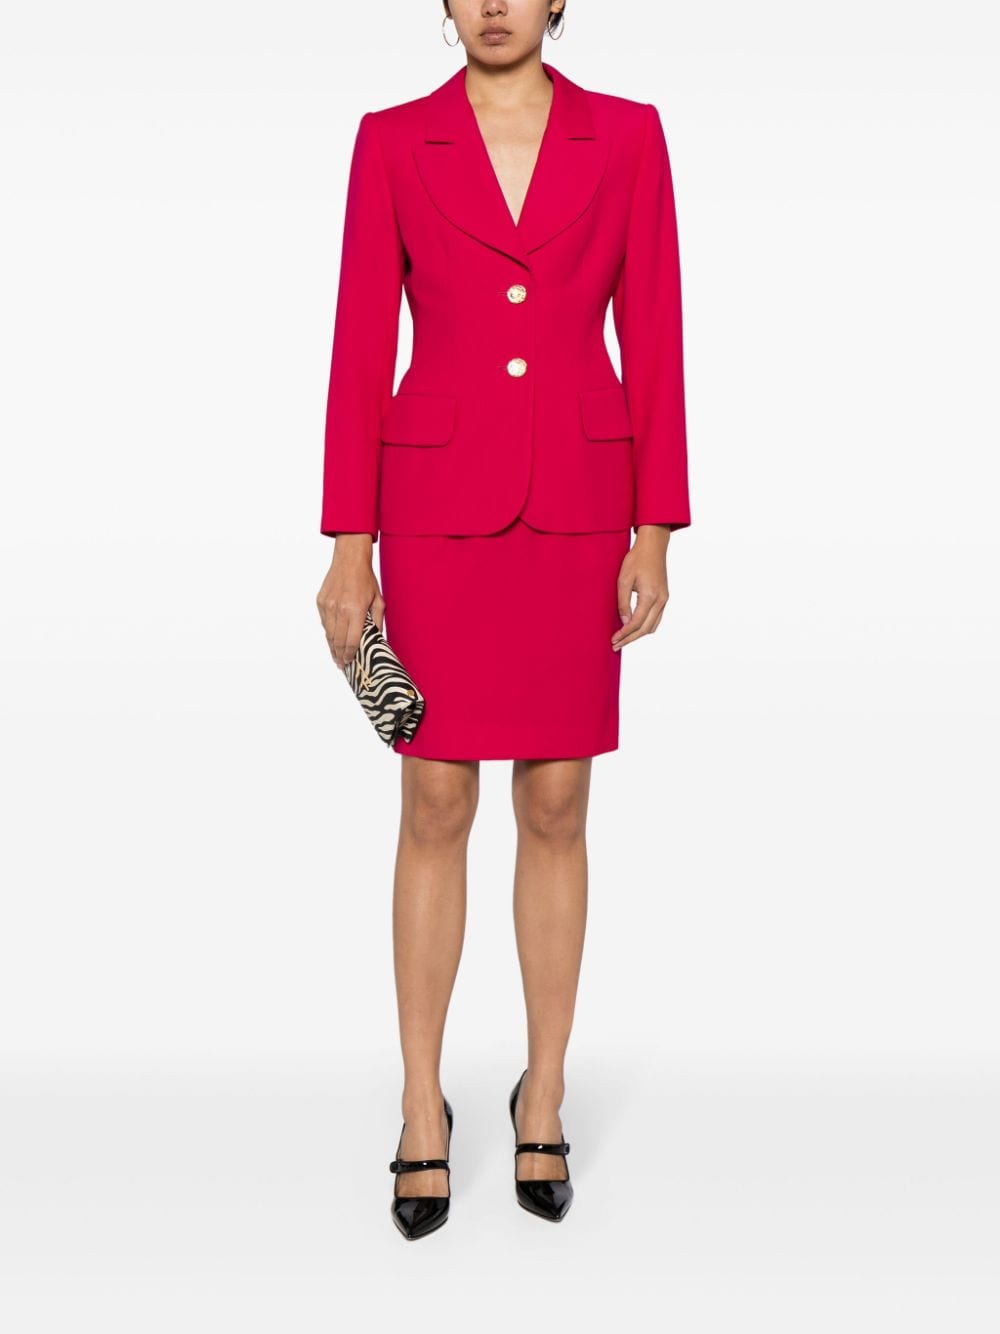 Saint Laurent Pre-Owned single-breasted skirt suit - Roze